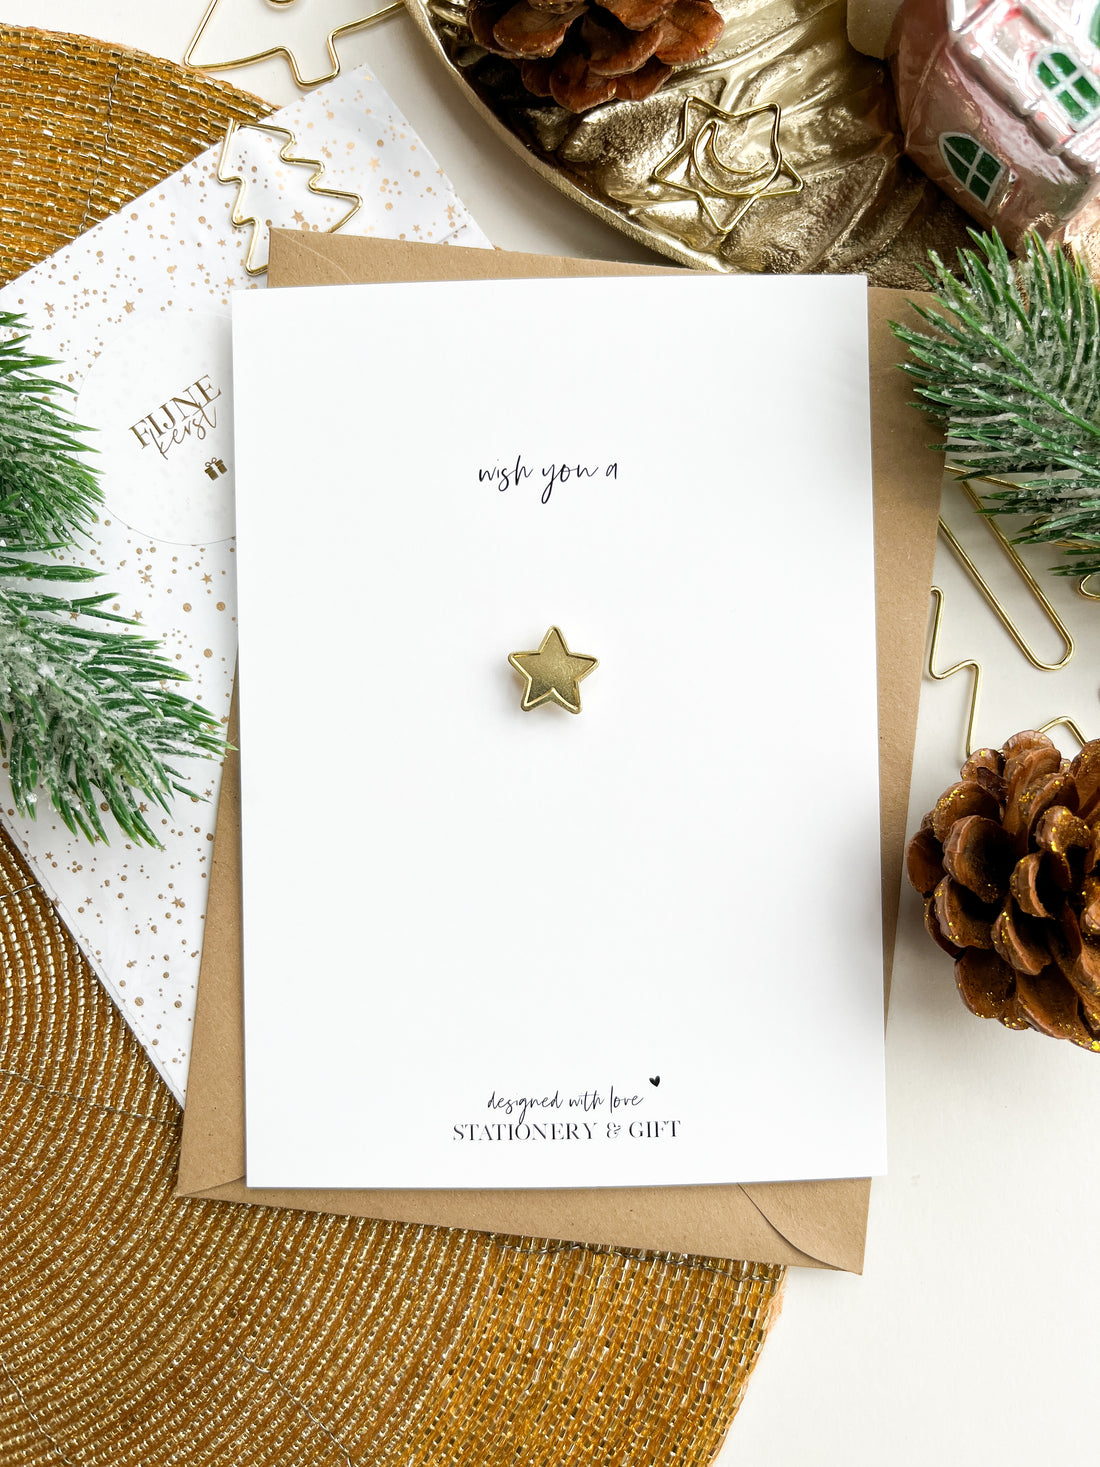 PIN | Wish you a star | With a star pin (including envelope)